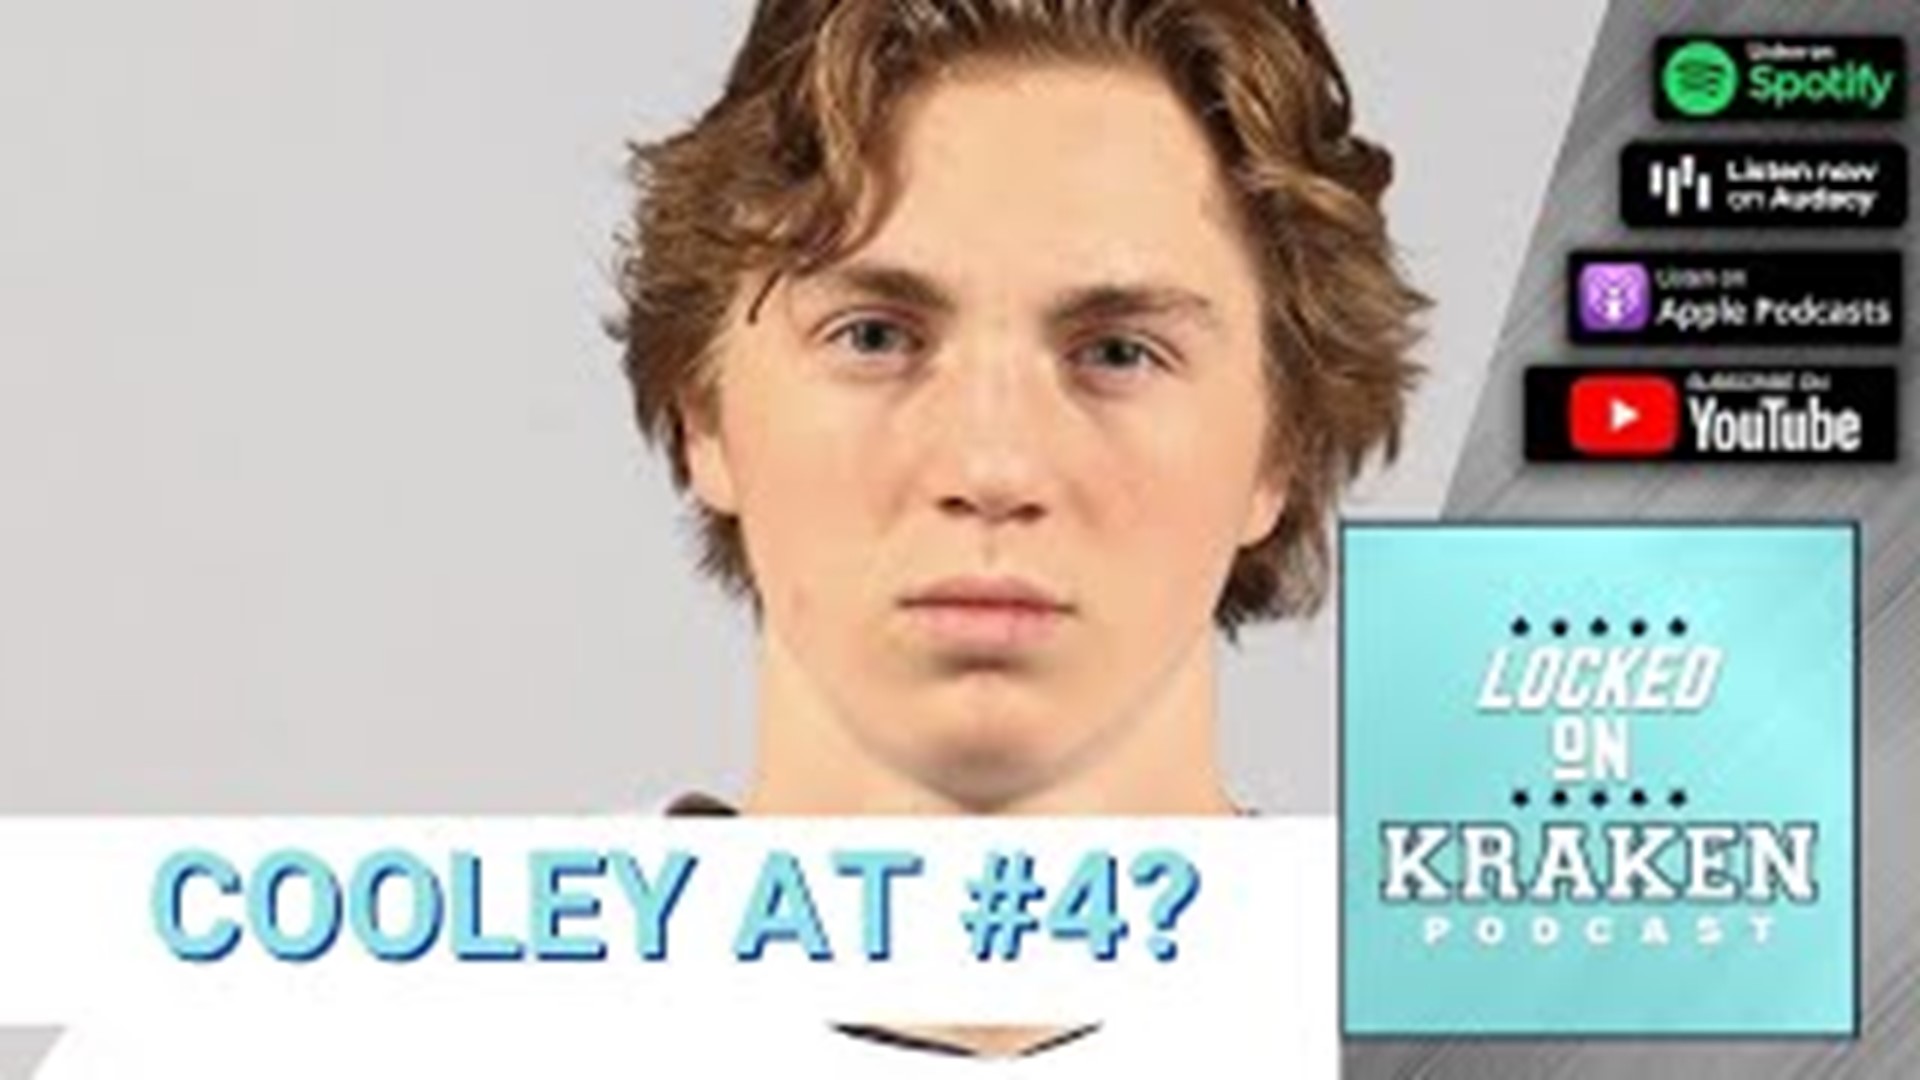 Locked on Kraken discusses if Logan Cooley could drop to the Seattle Kraken at No. 4 in the 2022 NHL Entry Draft.